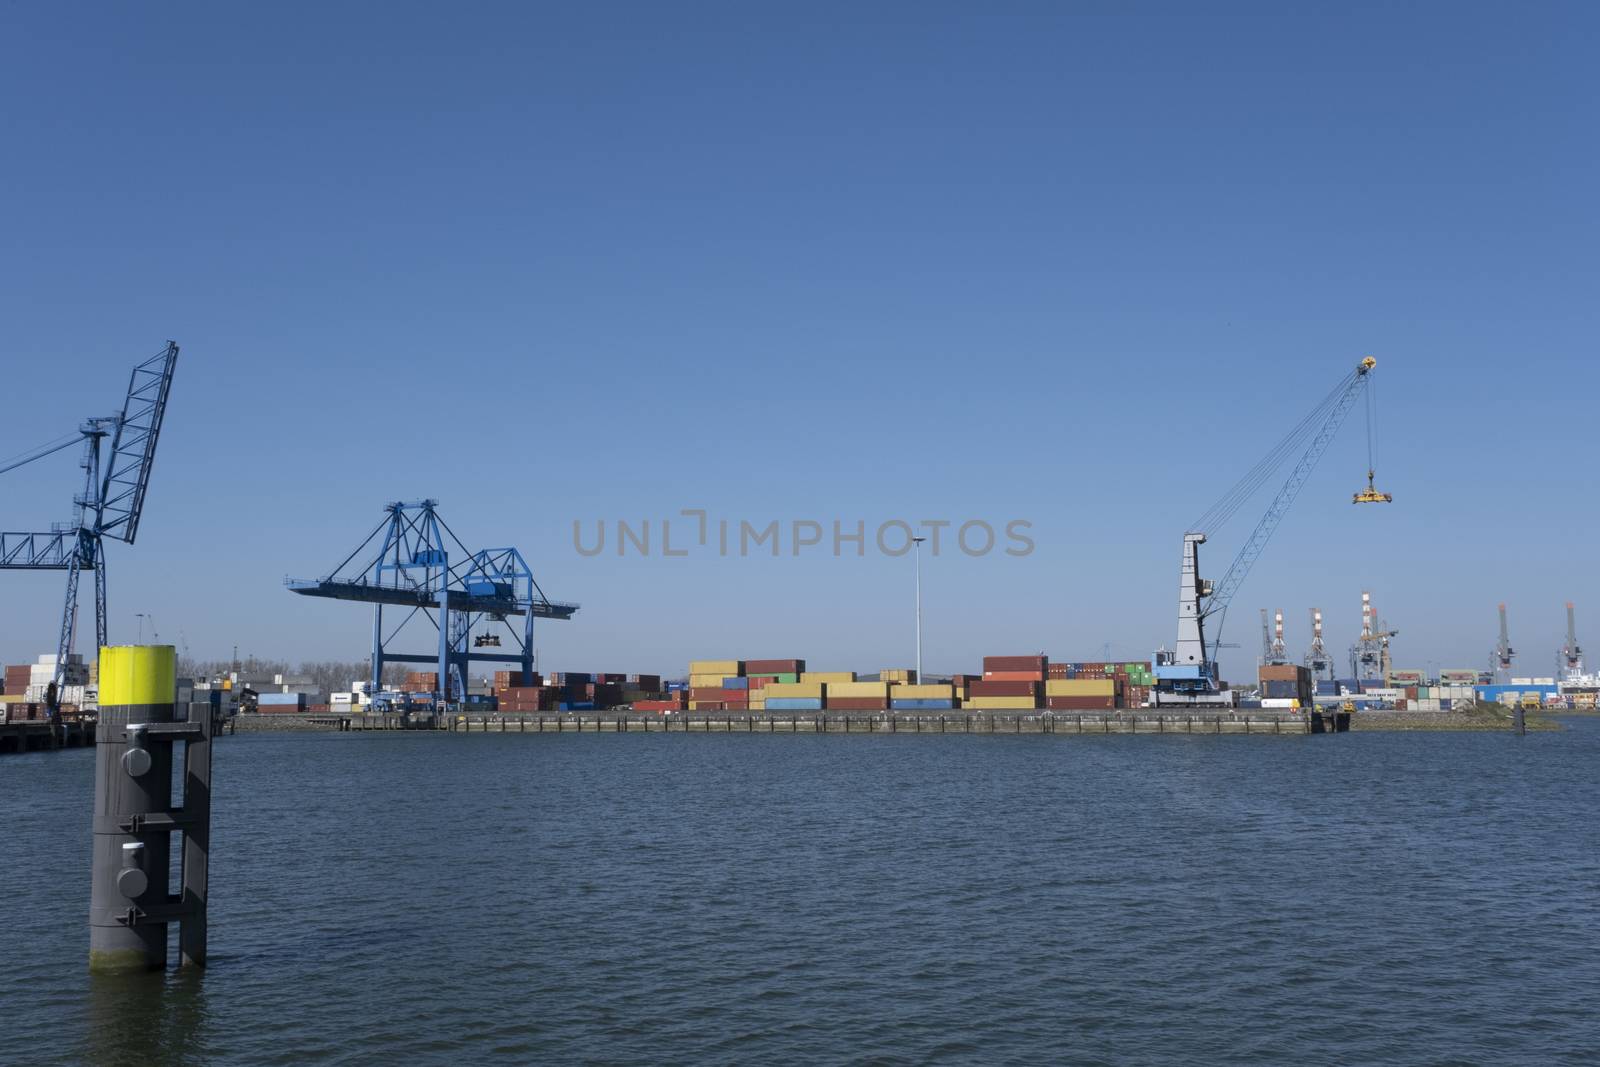 Huge cranes and ships anchored at harbor. International commerci by Tjeerdkruse